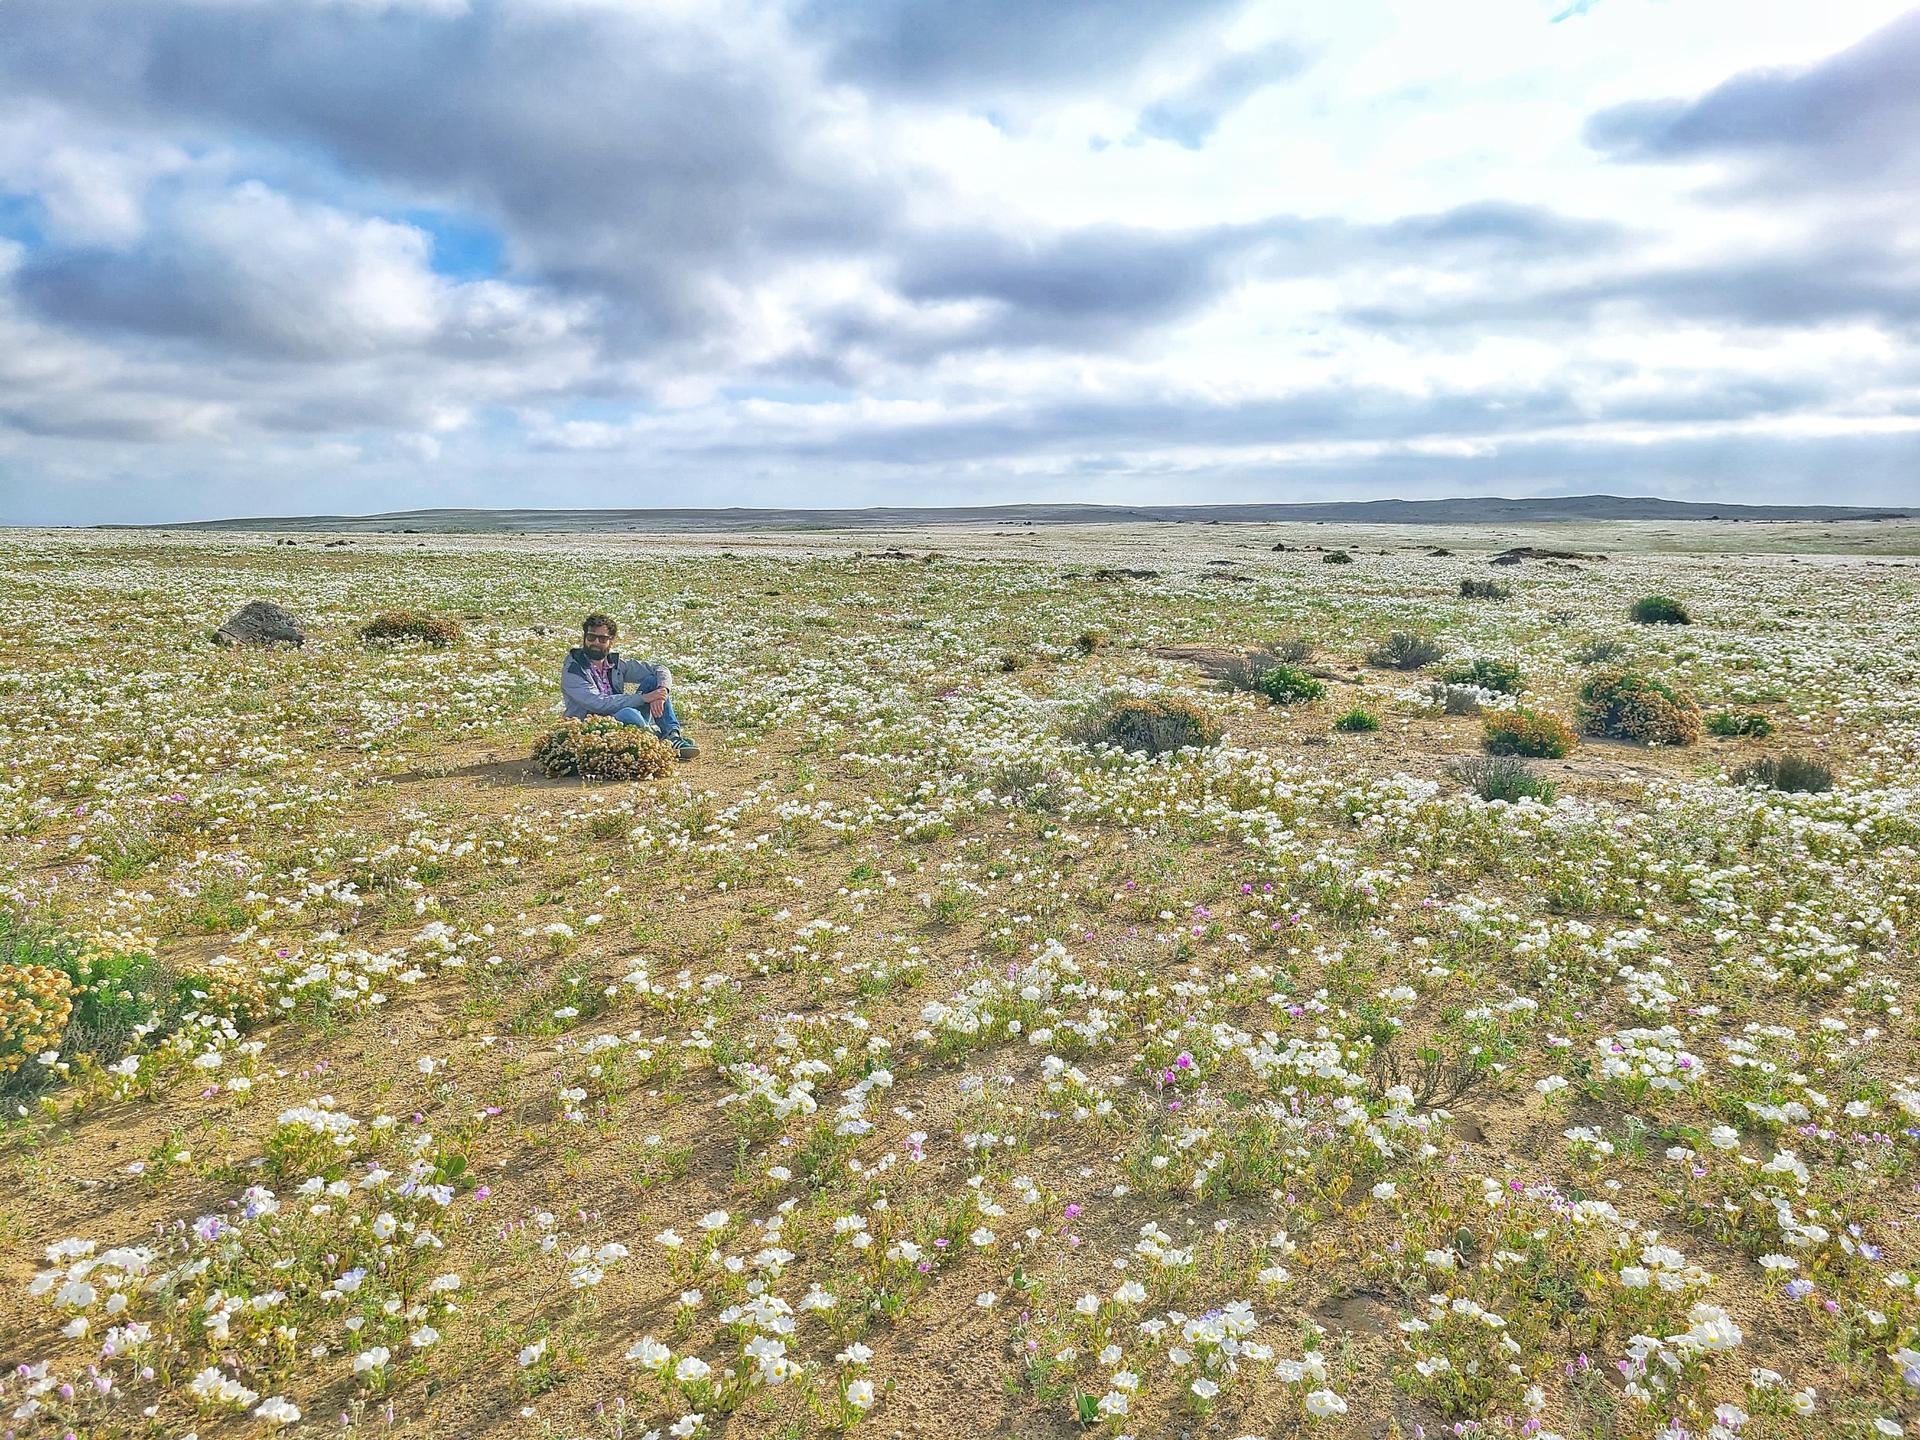 A tourist poses in a field of flowers in the Atacama Desert in northern Chile.